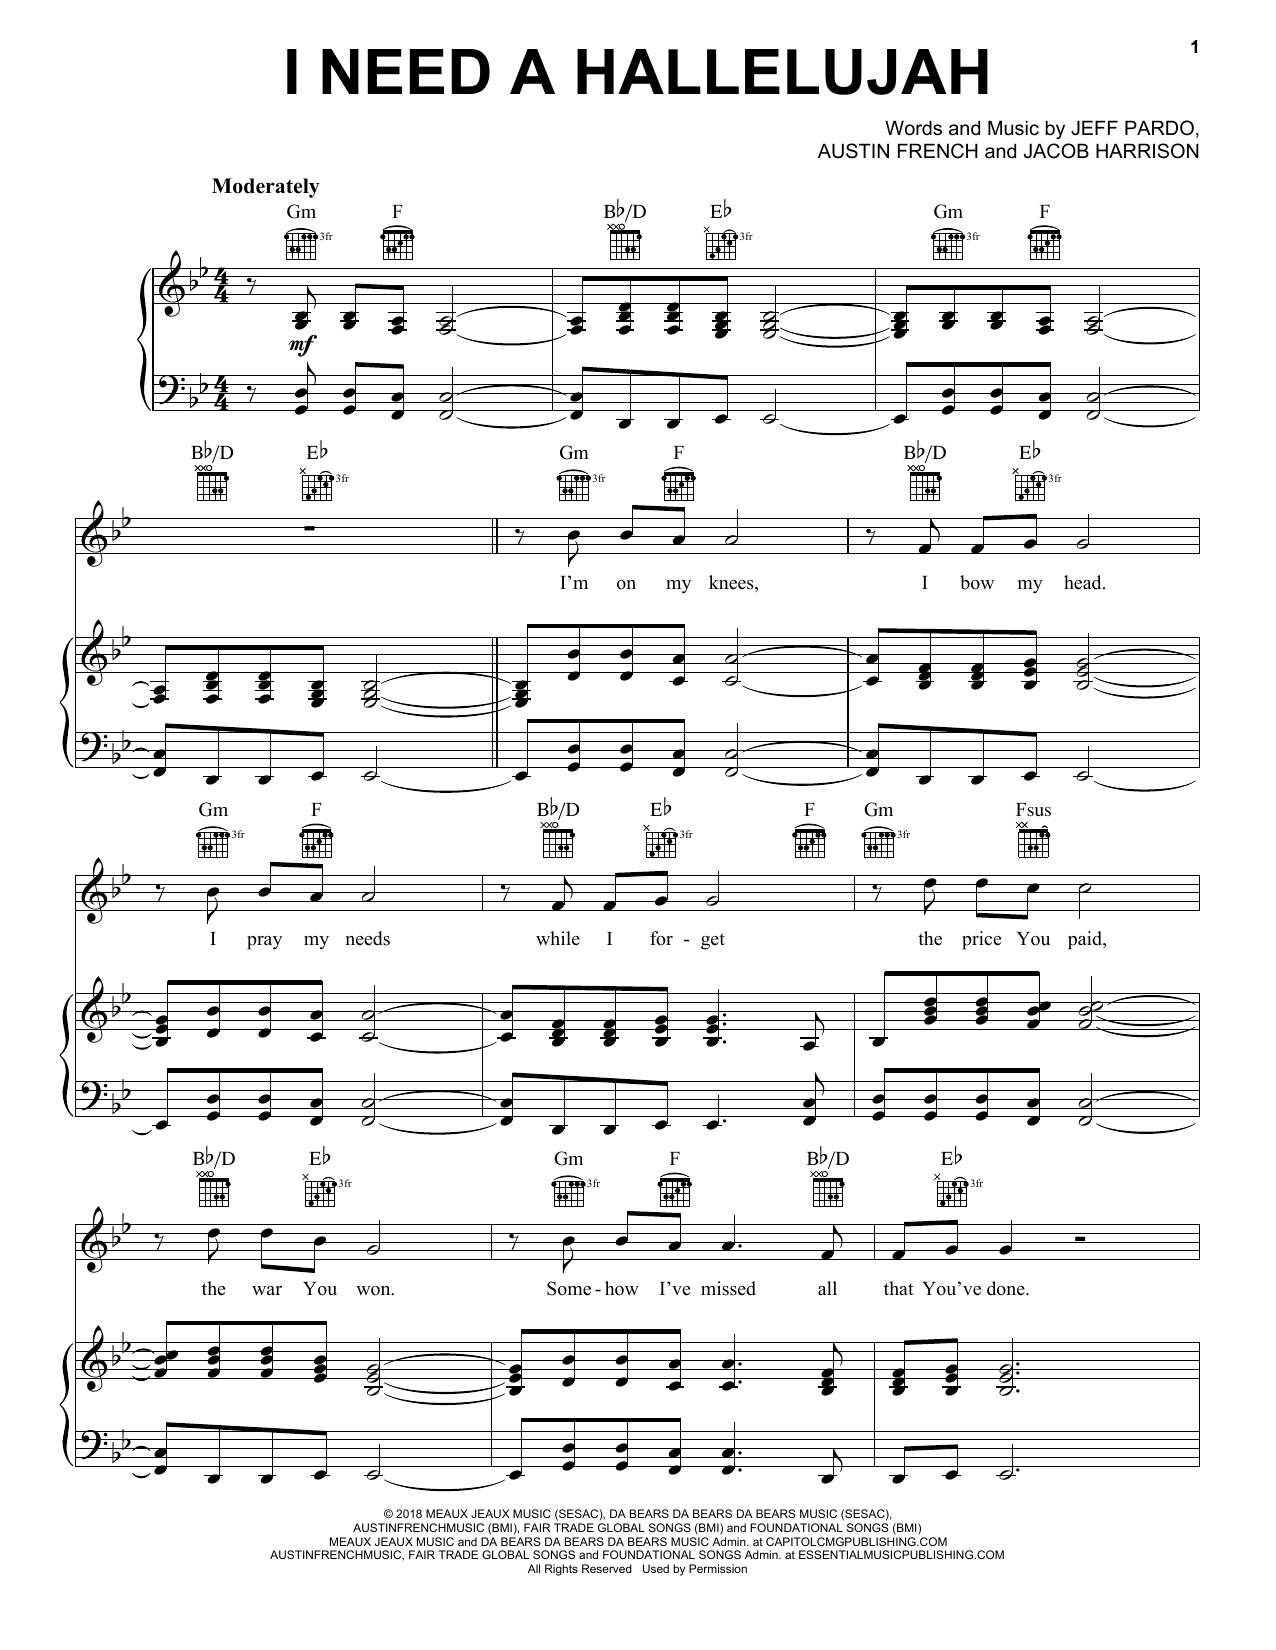 Download Austin French I Need A Hallelujah Sheet Music